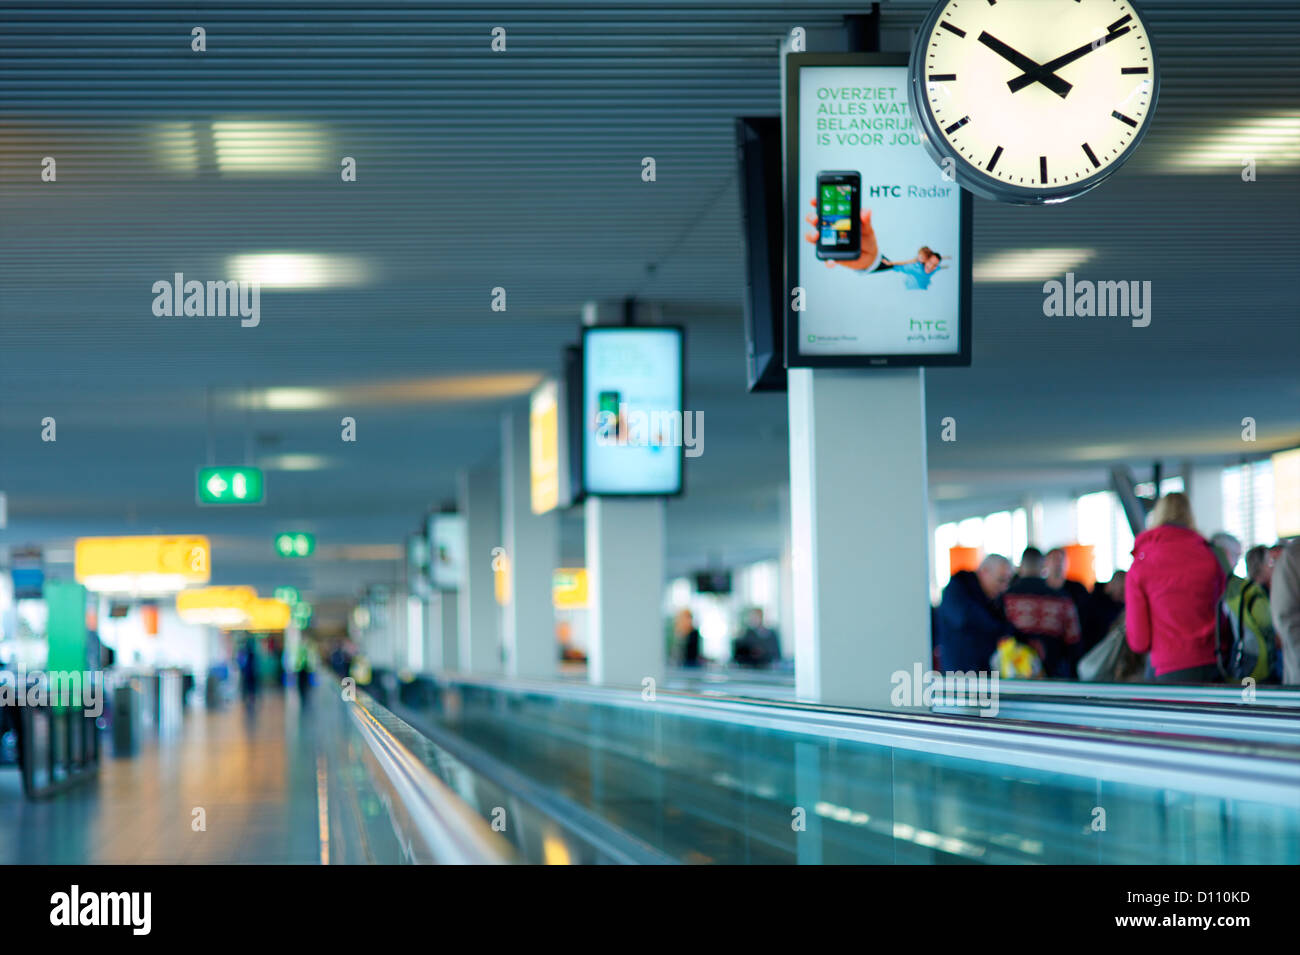 Conveyor belt in airport with people in the distance. Stock Photo